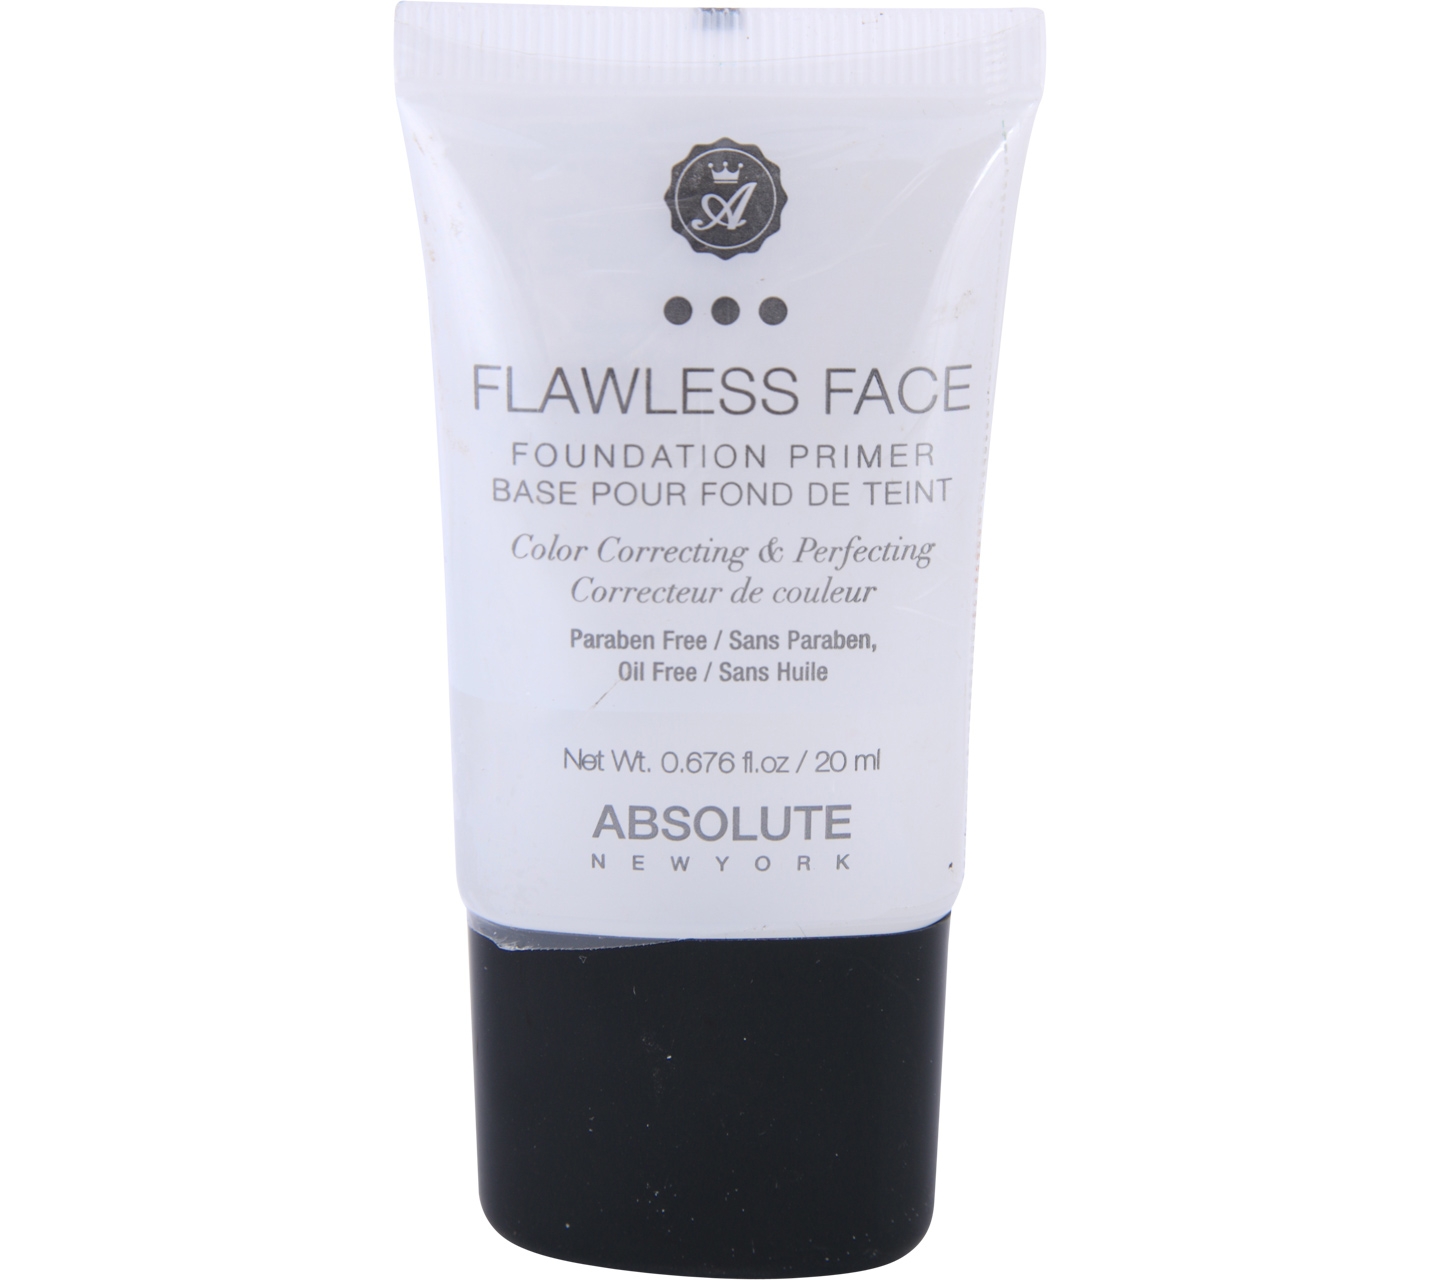 Absolute Flawless Face Foundation Primer Faces